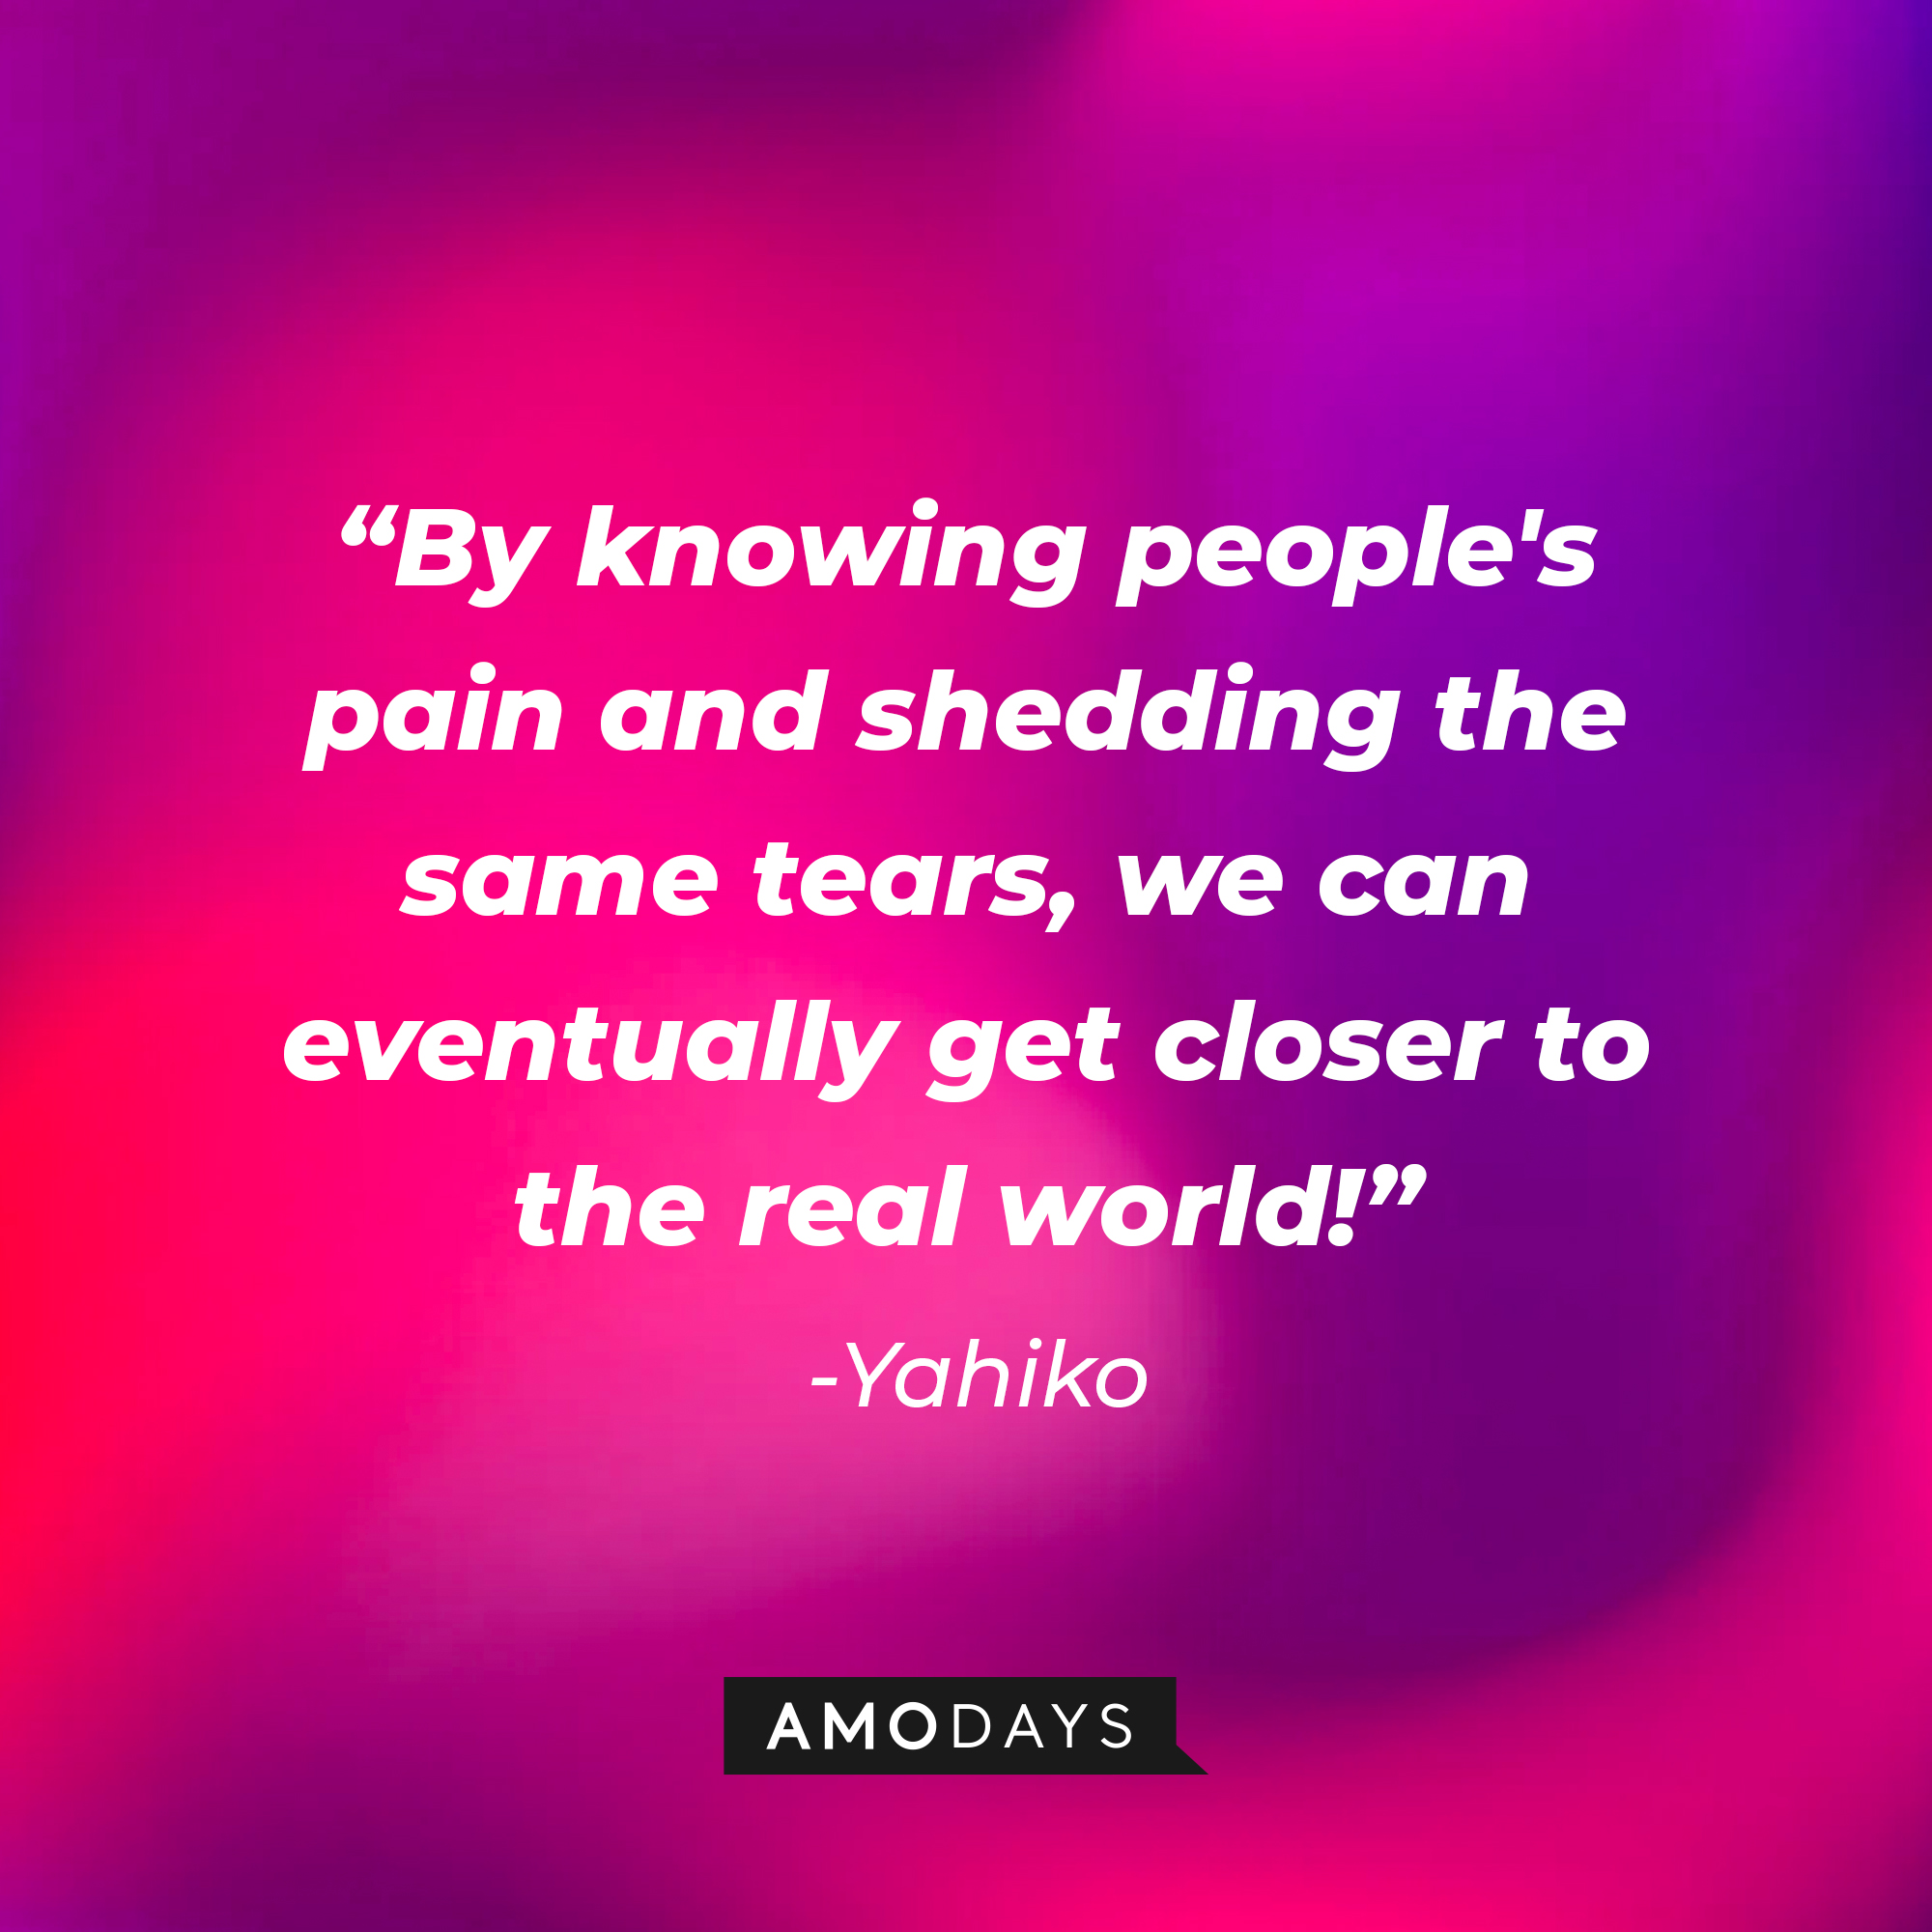 Yahiko’s quote: "By knowing people's pain and shedding the same tears, we can eventually get closer to the real world!" | Source: AmoDays